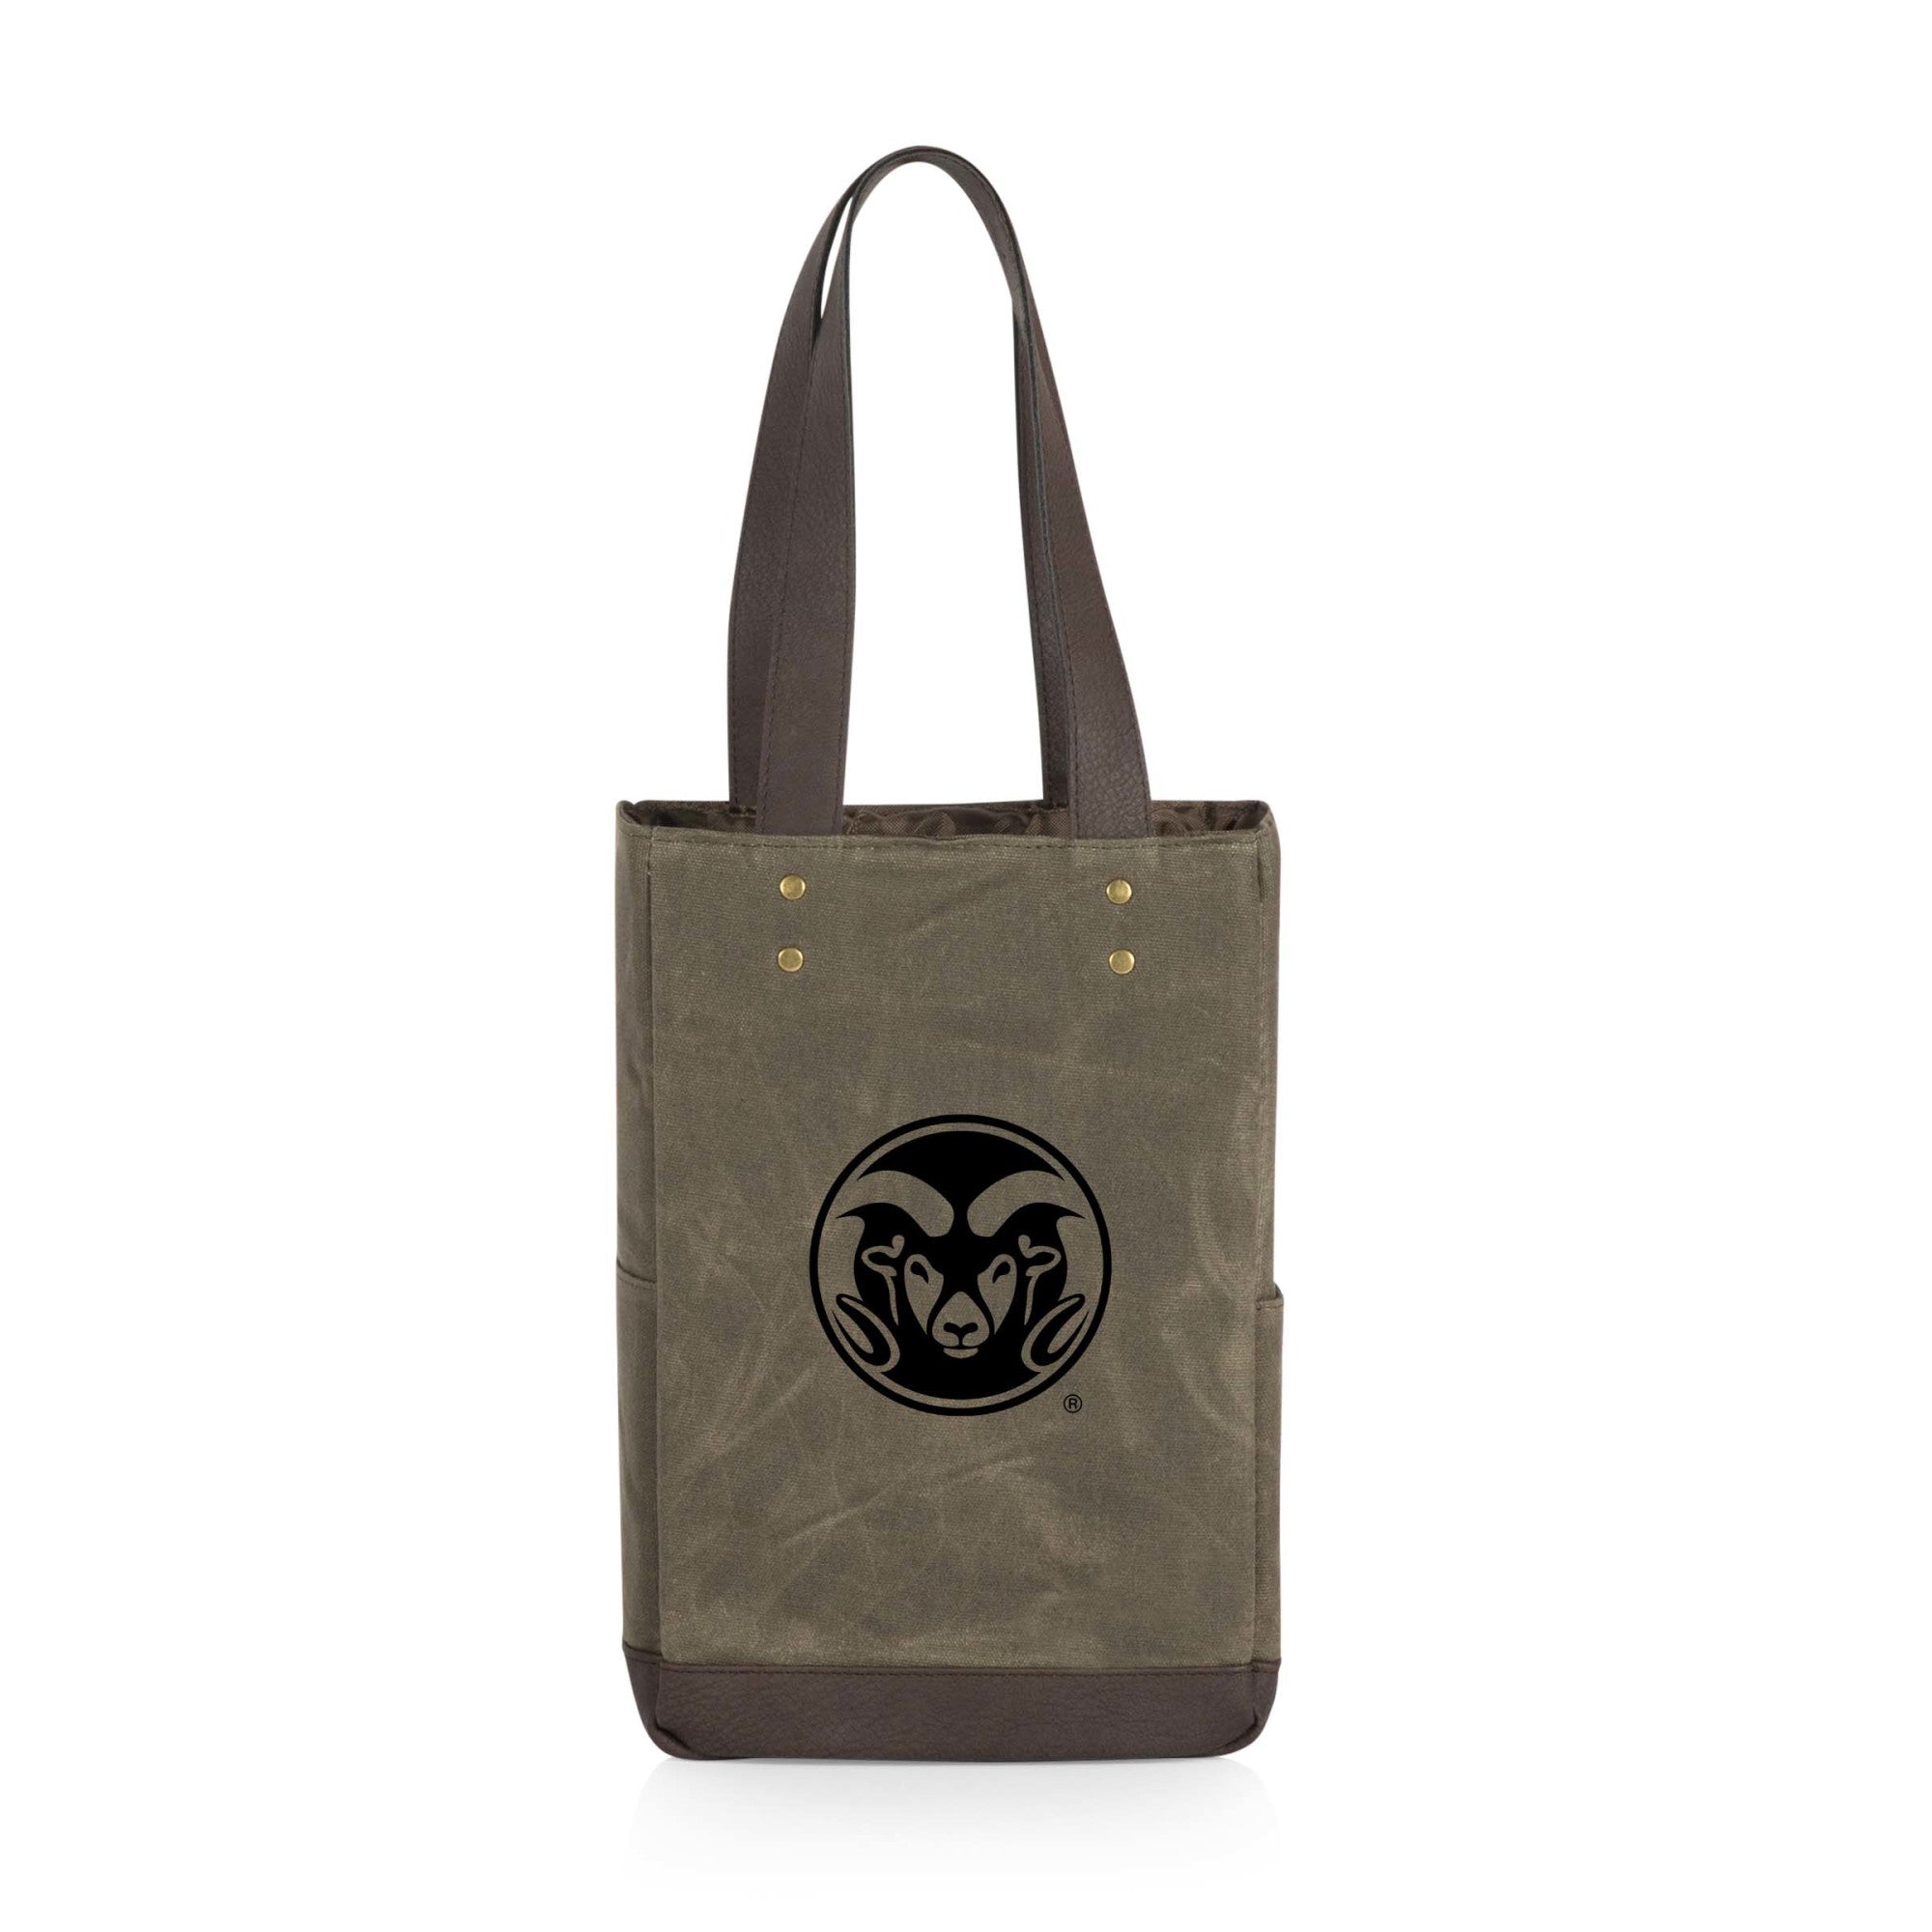 Colorado State Rams - 2 Bottle Insulated Wine Cooler Bag